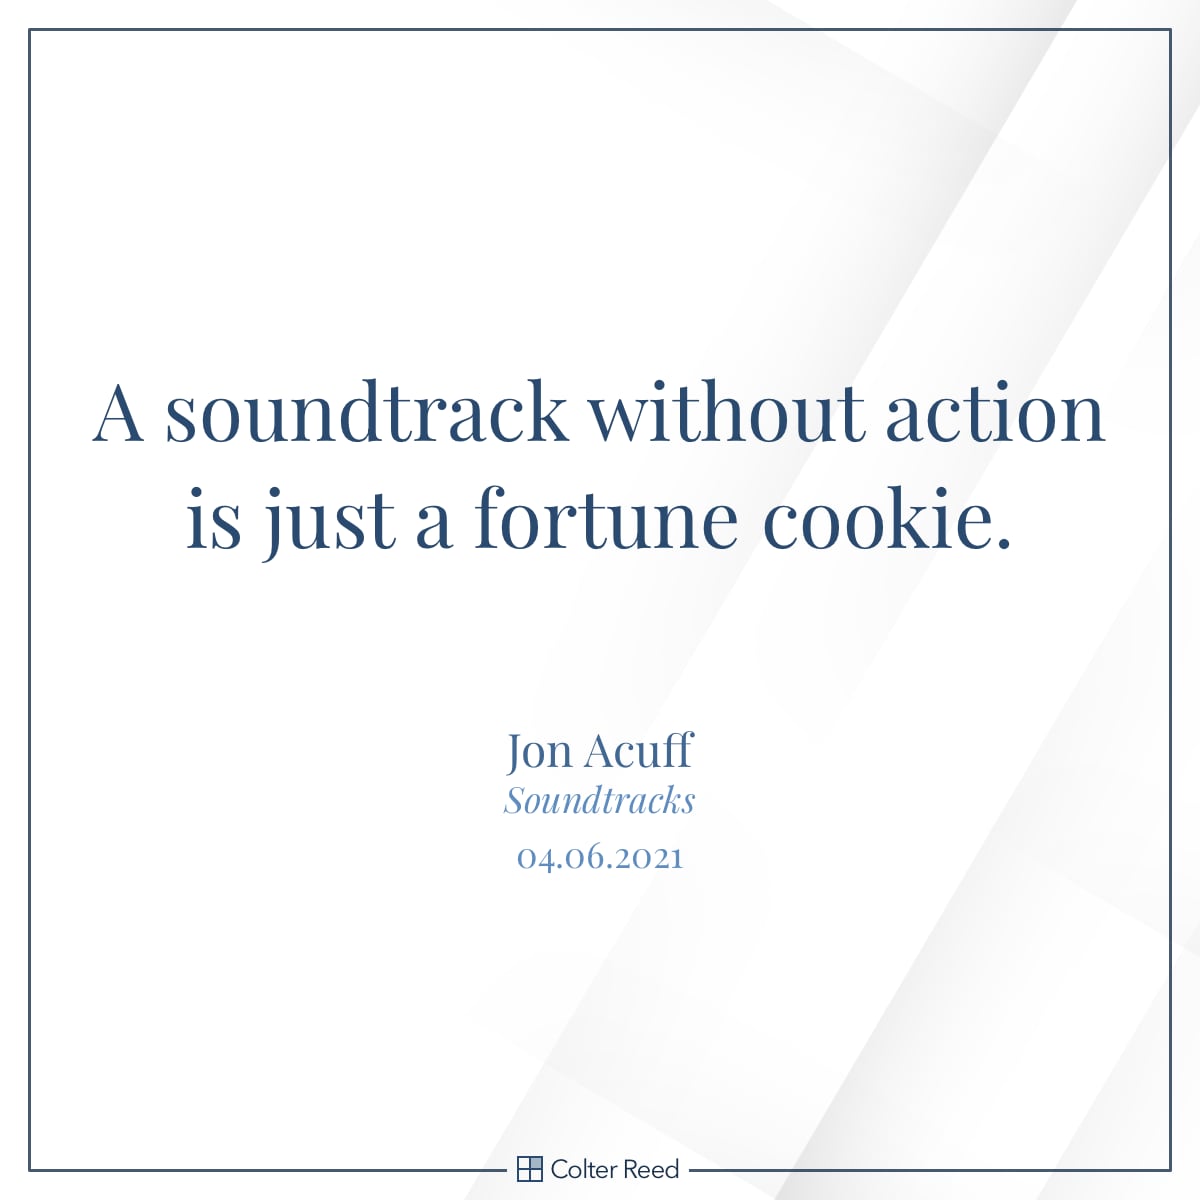 A soundtrack without action is just a fortune cookie. —Jon Acuff